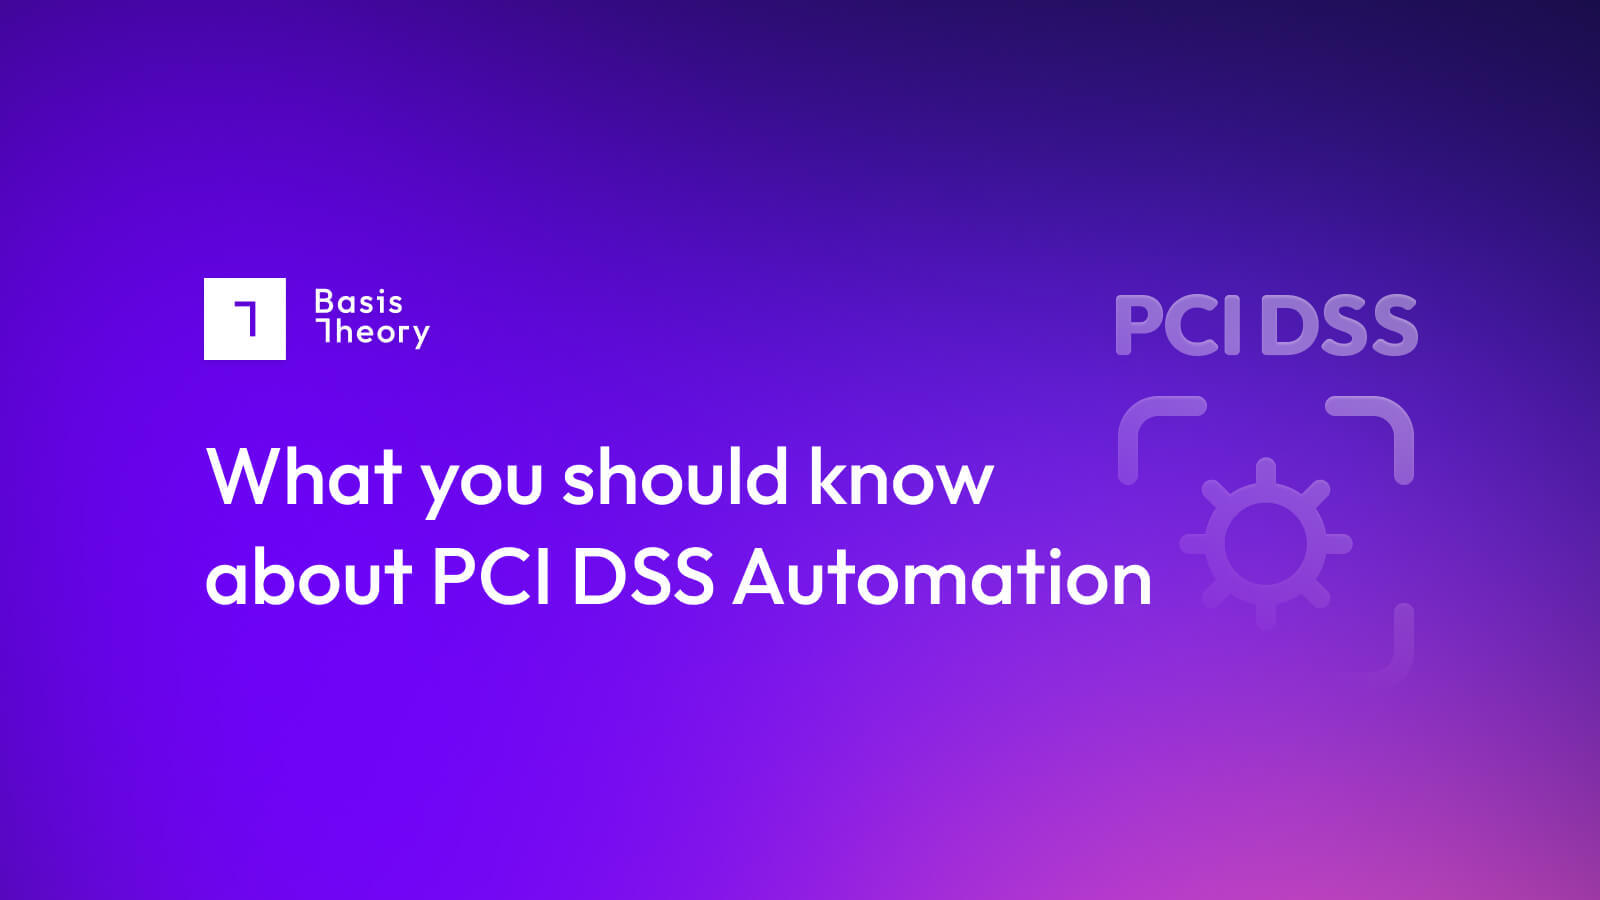 What you should know about PCI automation